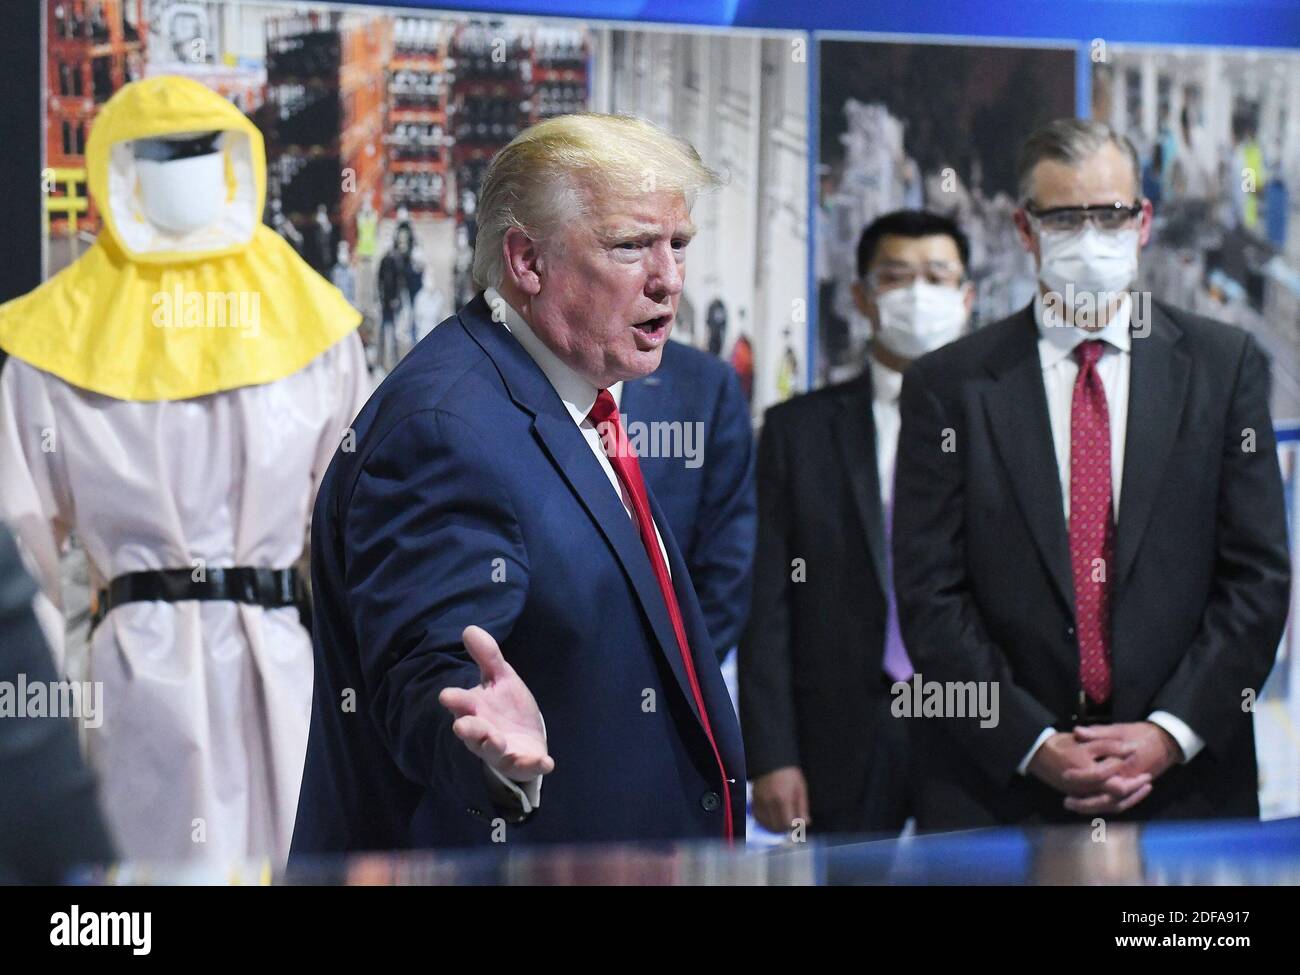 NO FILM, NO VIDEO, NO TV, NO DOCUMENTARY - President Donald Trump speaks during a visit to Ford Motor Co.'s Rawsonville Components Plant in Ypsilanti, MI, USA on Thursday, May 21, 2020. Trump says he wore a mask in a 'back area' during a factory tour in Michigan, but removed it before facing the cameras. He told reporters he took off the facial covering at the Ford car plant because he 'didn't want to give the press the pleasure of seeing it', and he was about to make a speech. Photo by Daniel Mears/The Detroit News/TNS/ABACAPRESS.COM Stock Photo